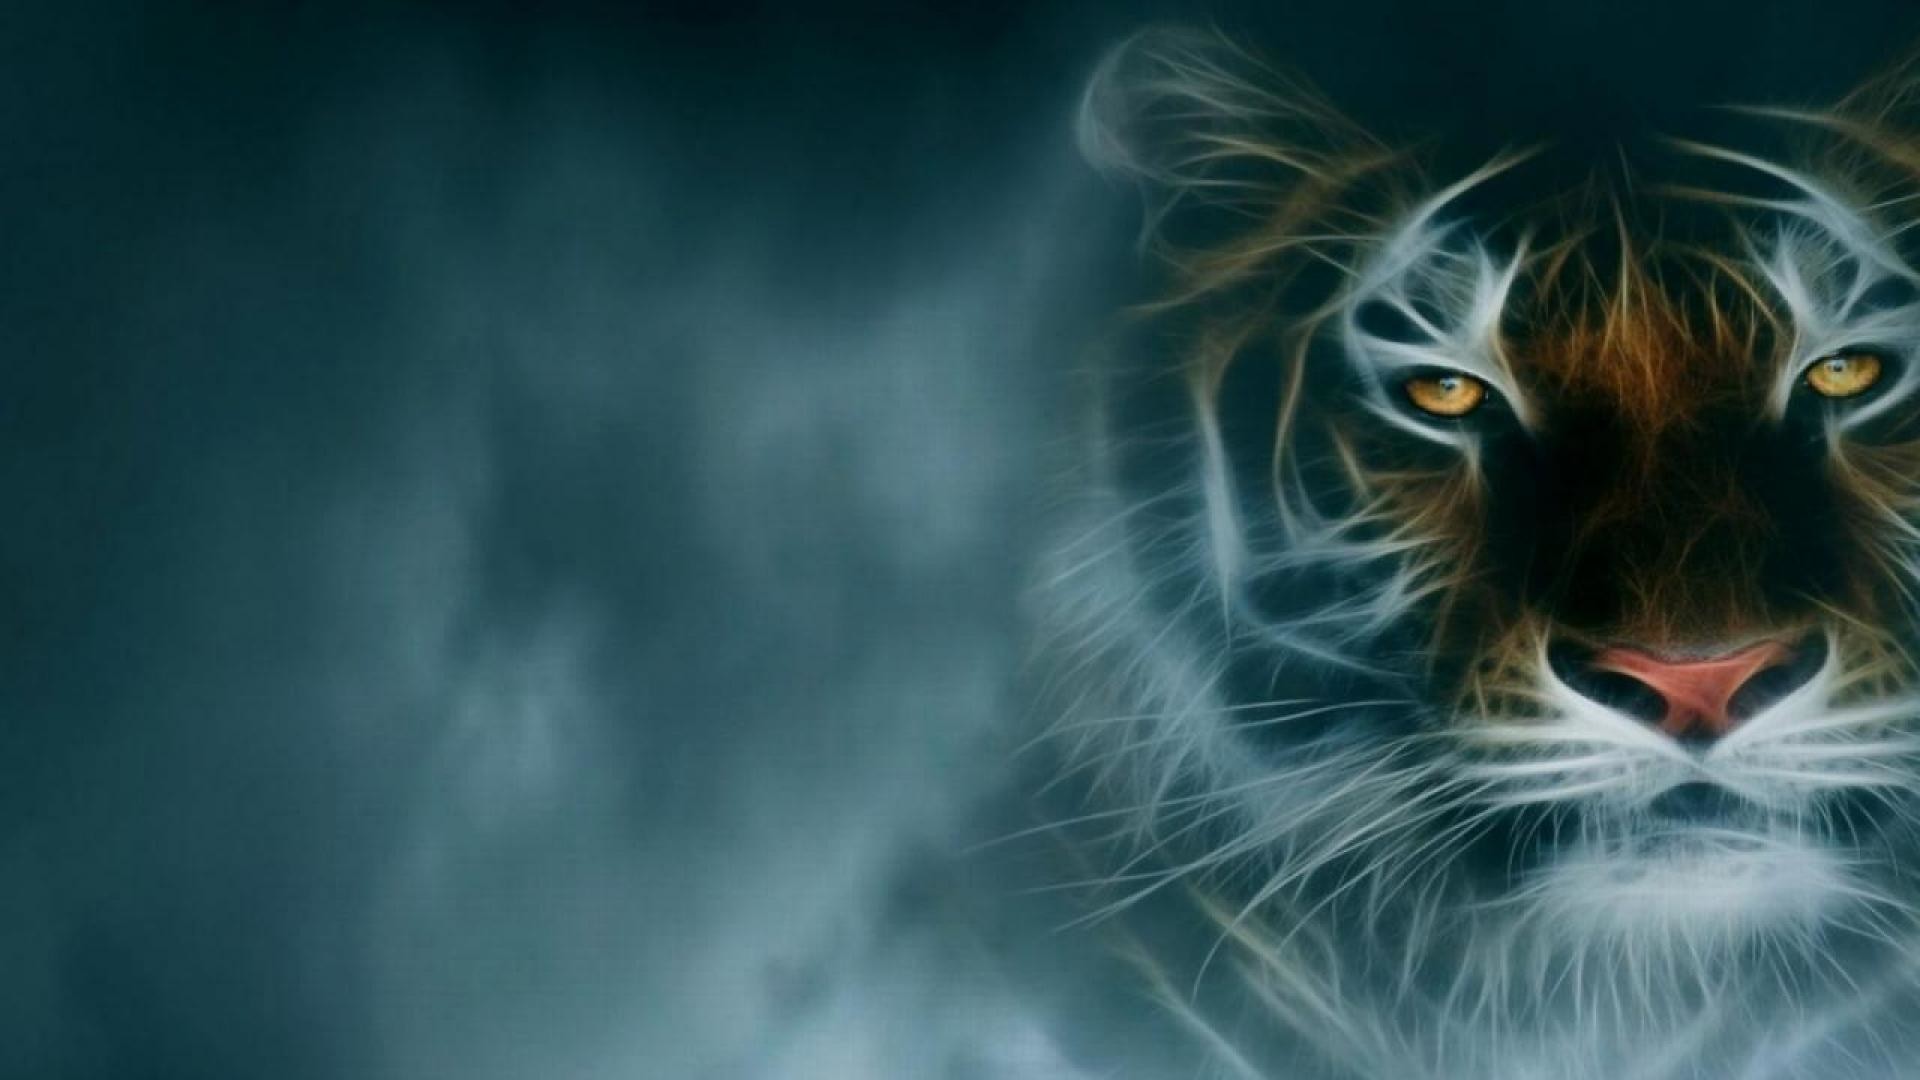 1920x1080  In Gallery Tiger Wallpapers Tiger HD Wallpapers Backgrounds | HD  Wallpapers | Pinterest | Tiger wallpaper, Wallpaper and Wallpaper  backgrounds